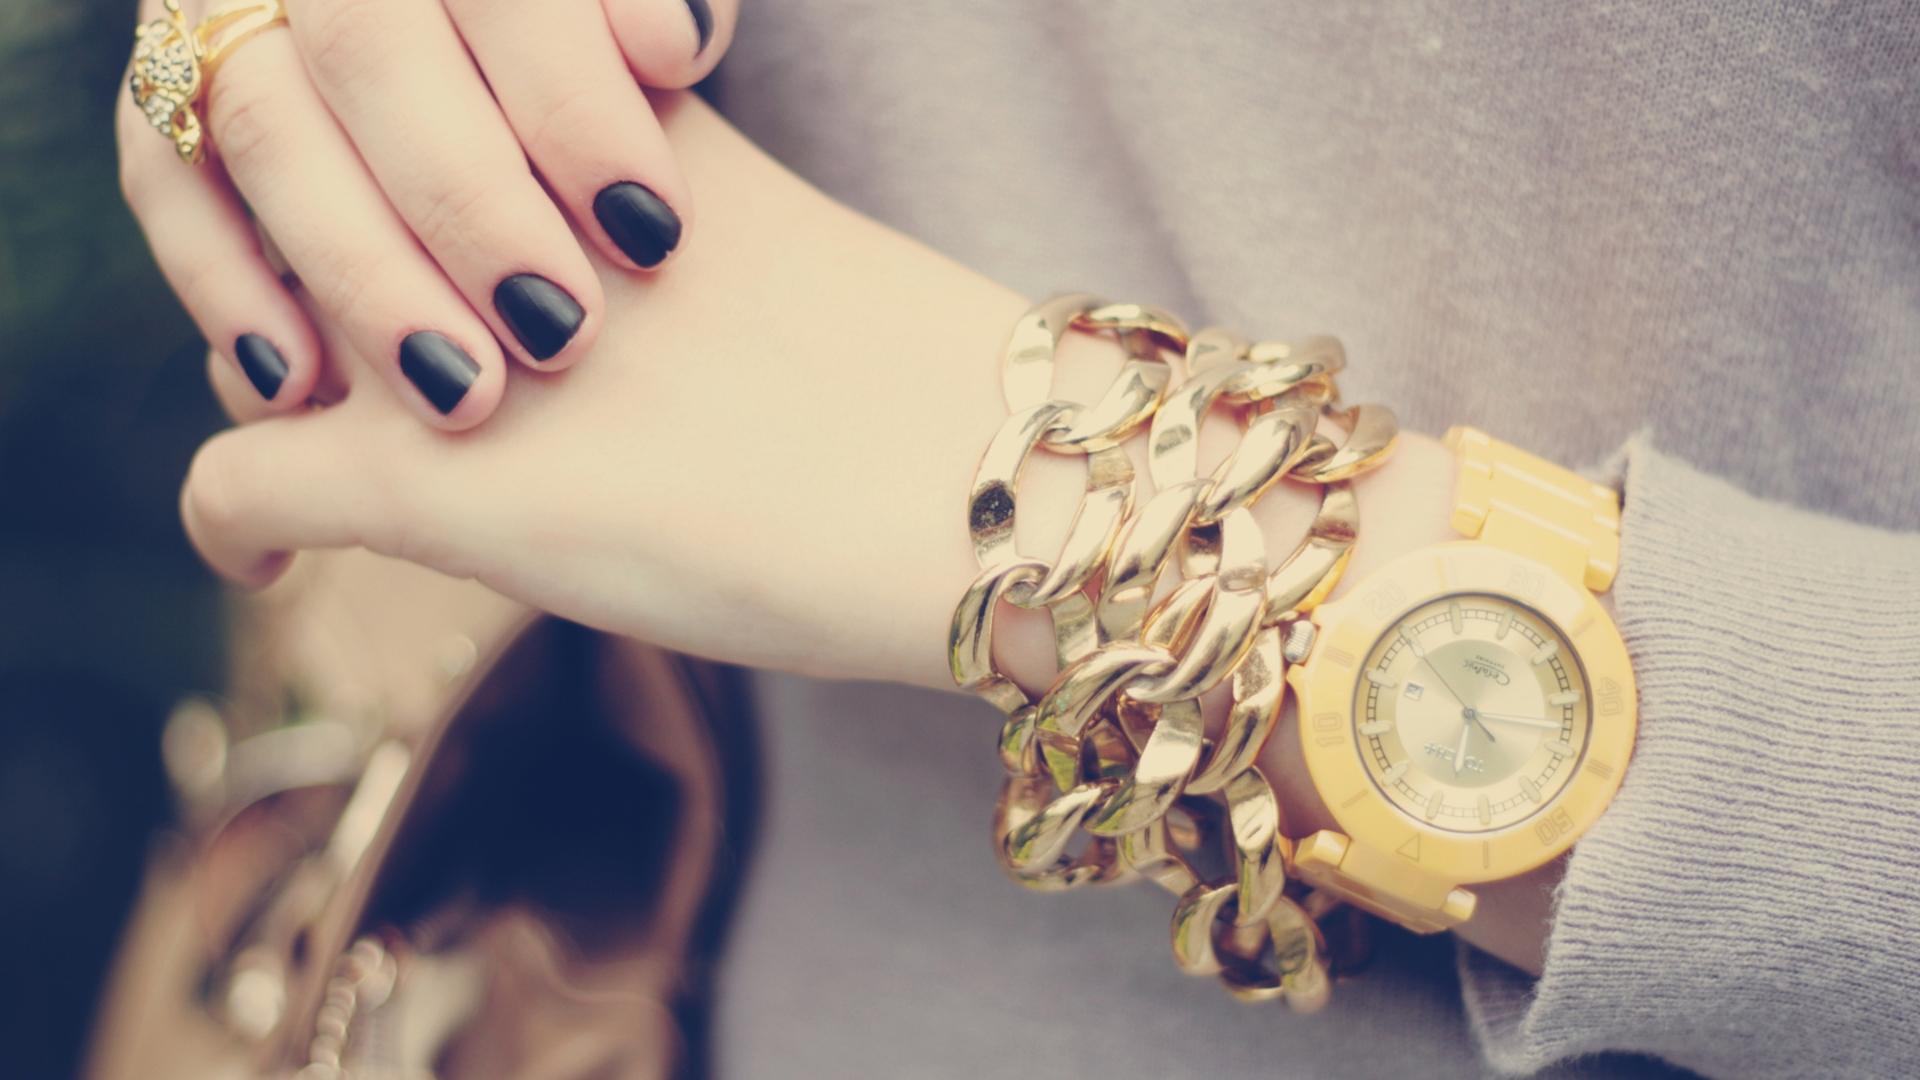 Wallpaper, hands, yellow, blue, jewelry, watches, girl, hand, nail